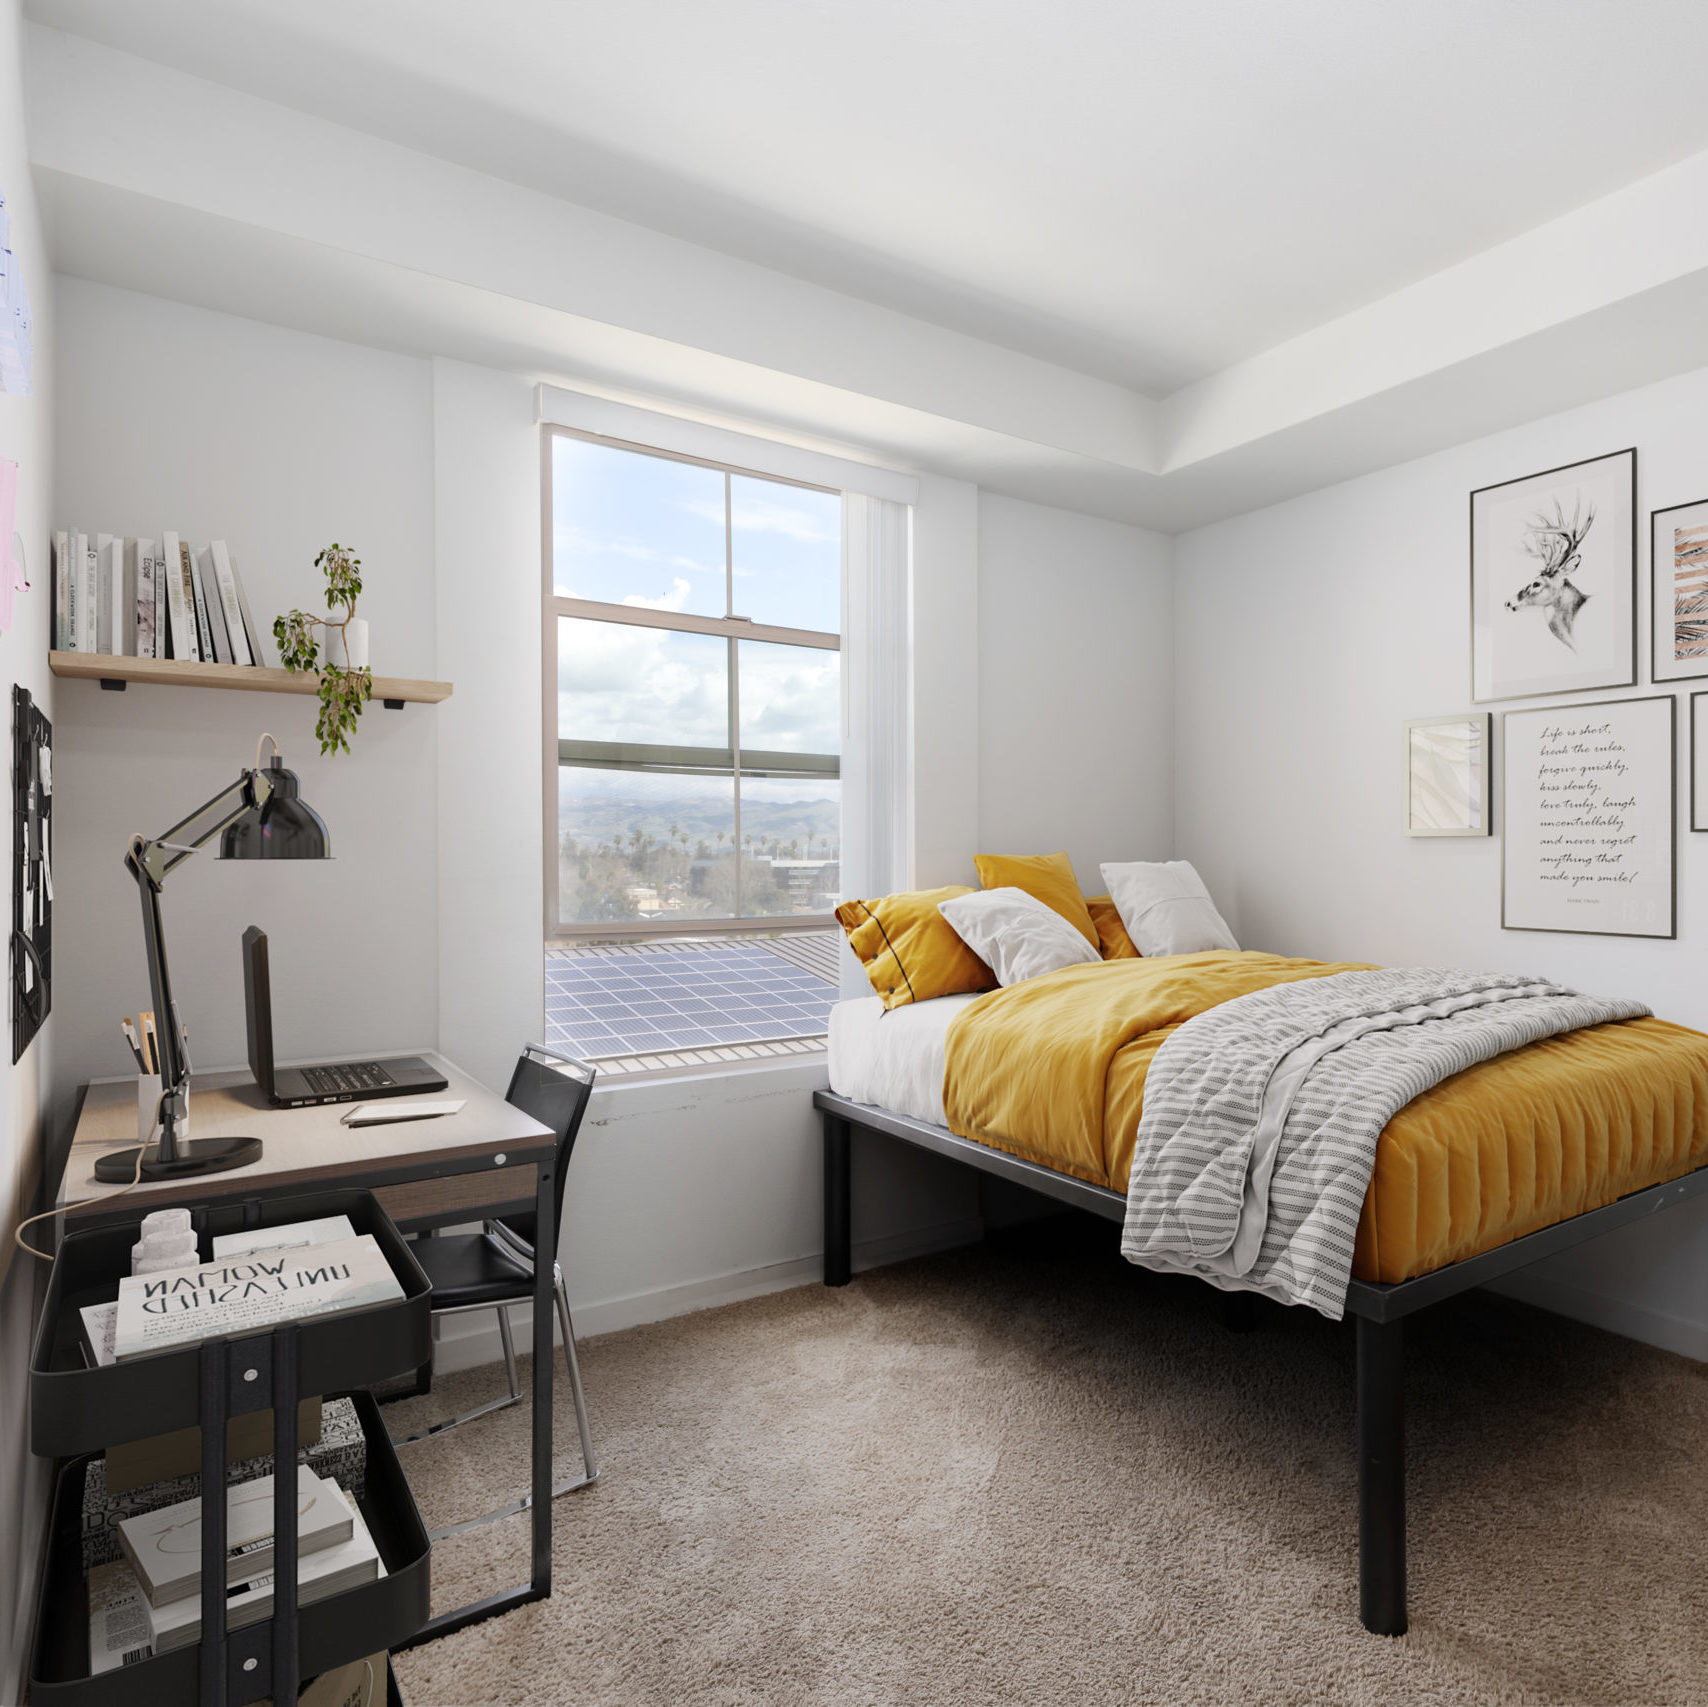 27 North - Private bedroom apartments